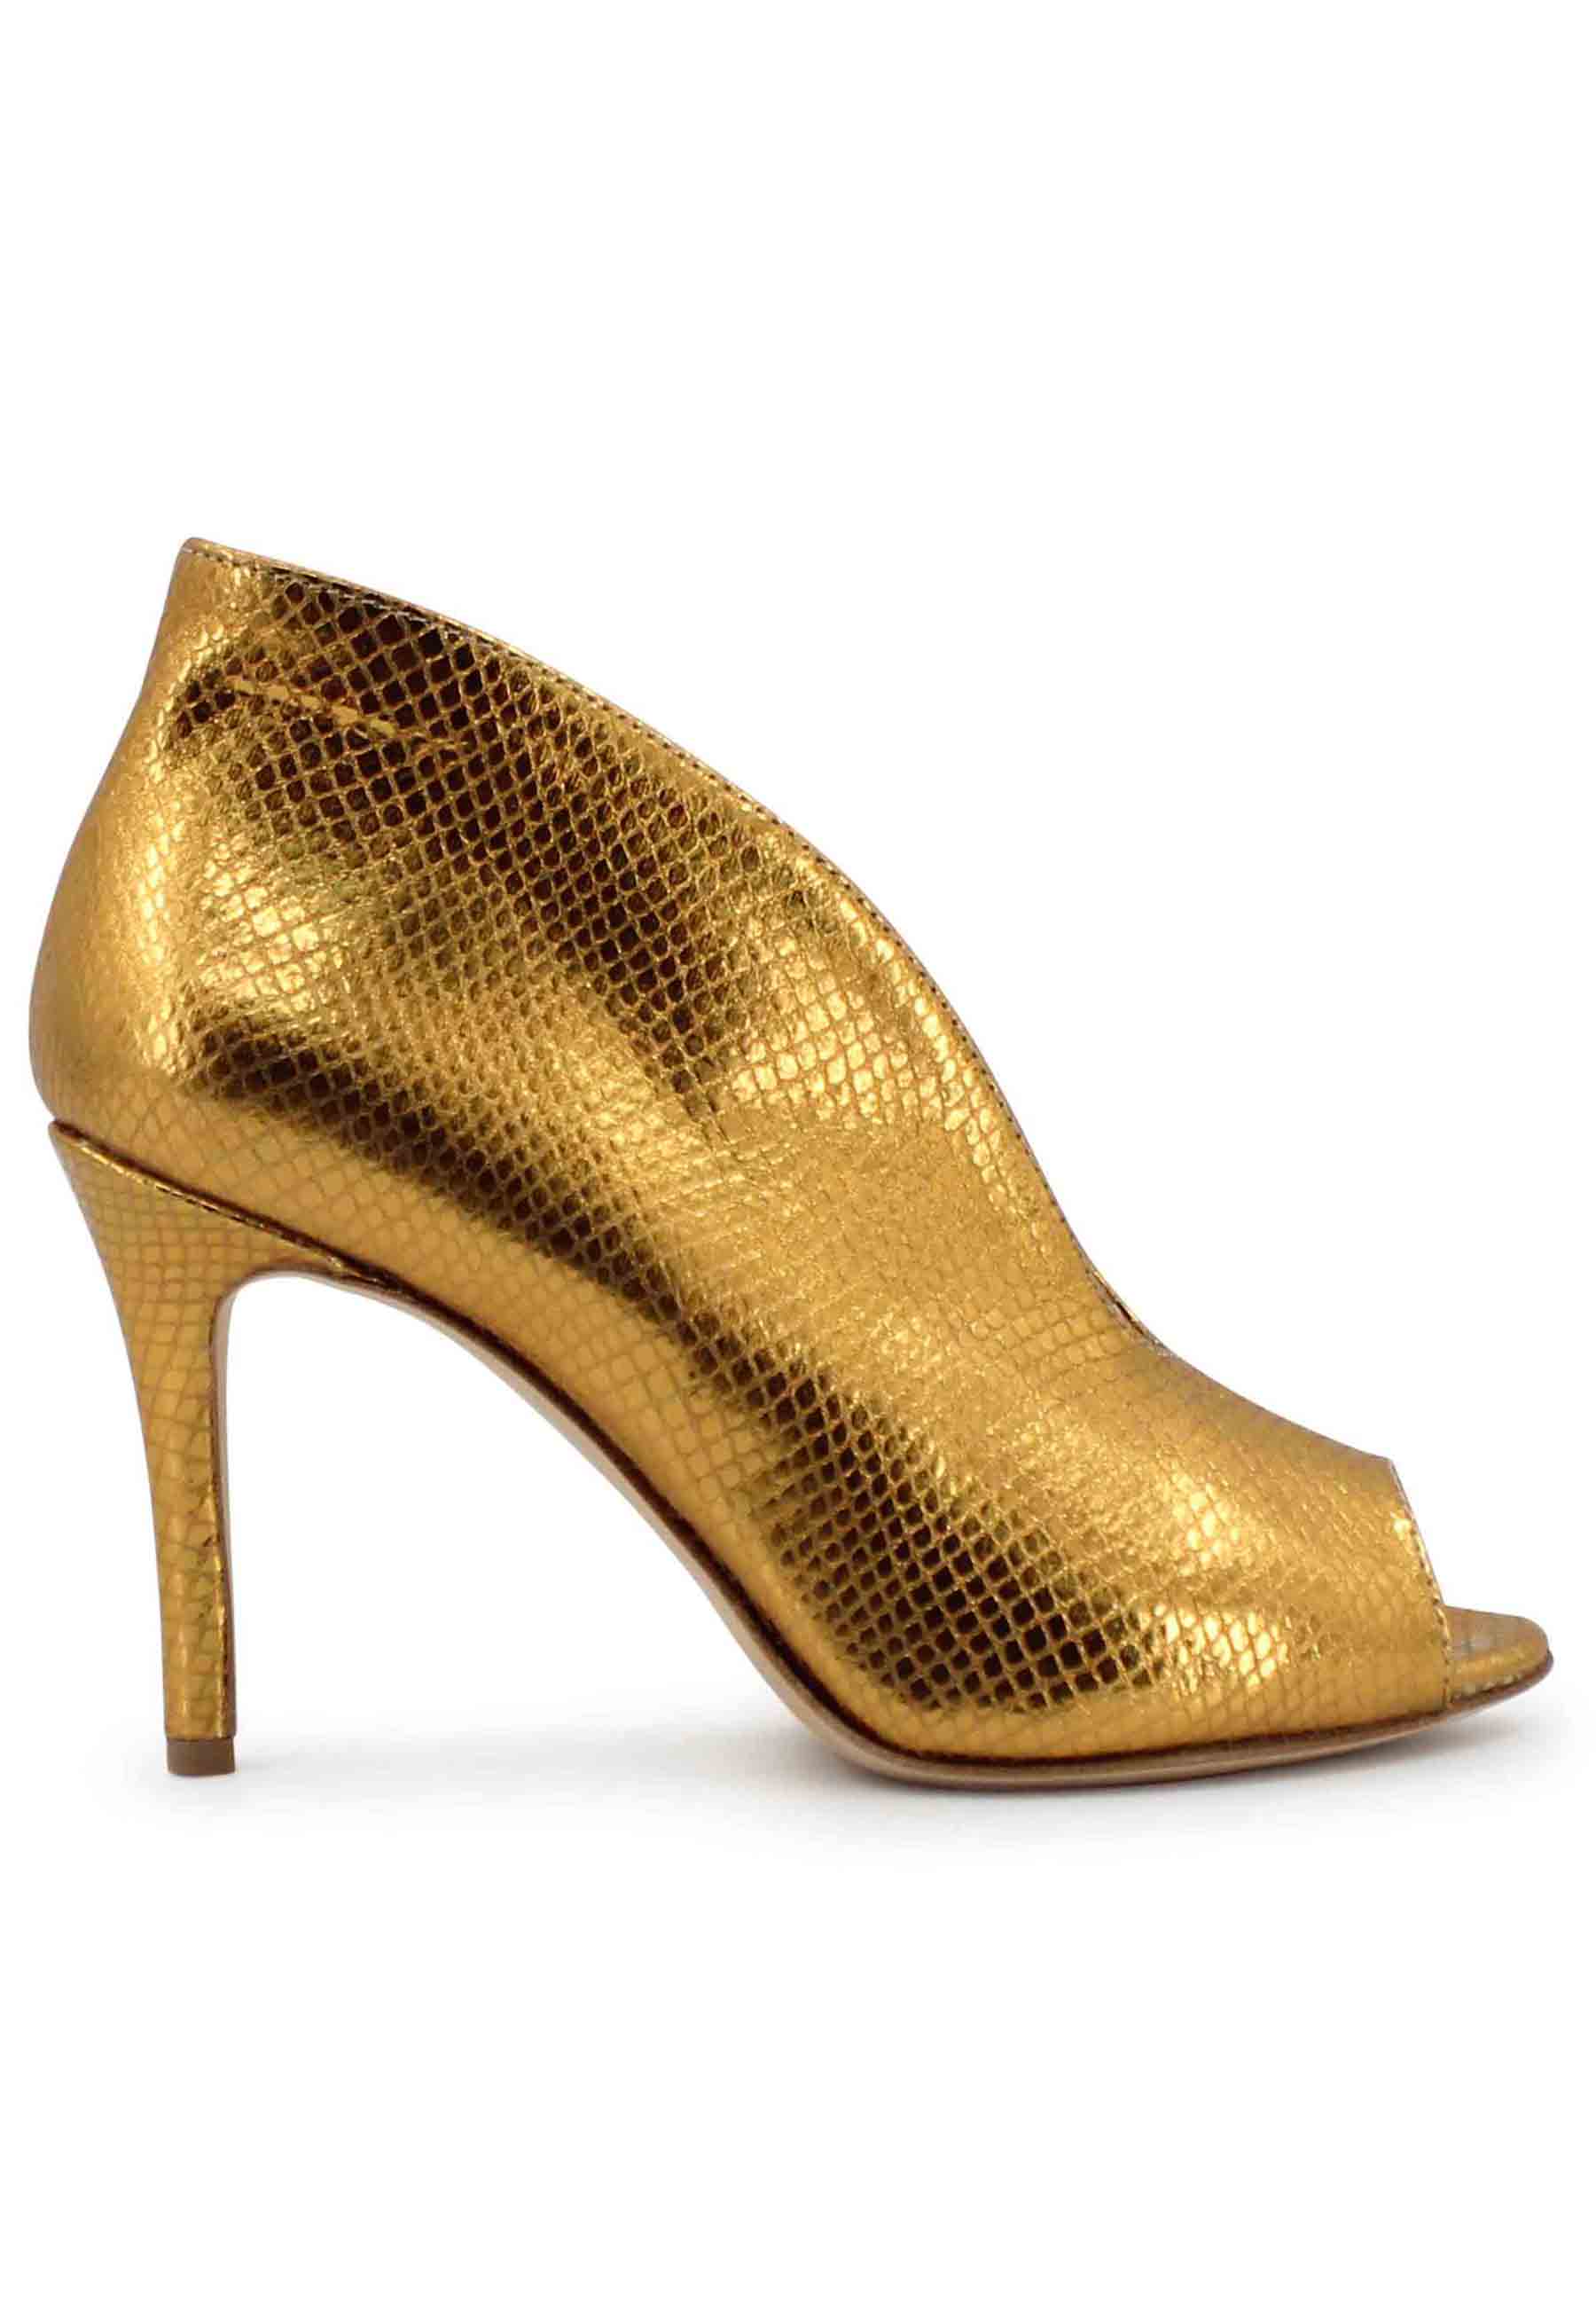 Women's open toe ankle boots in gold laminated leather with high heel